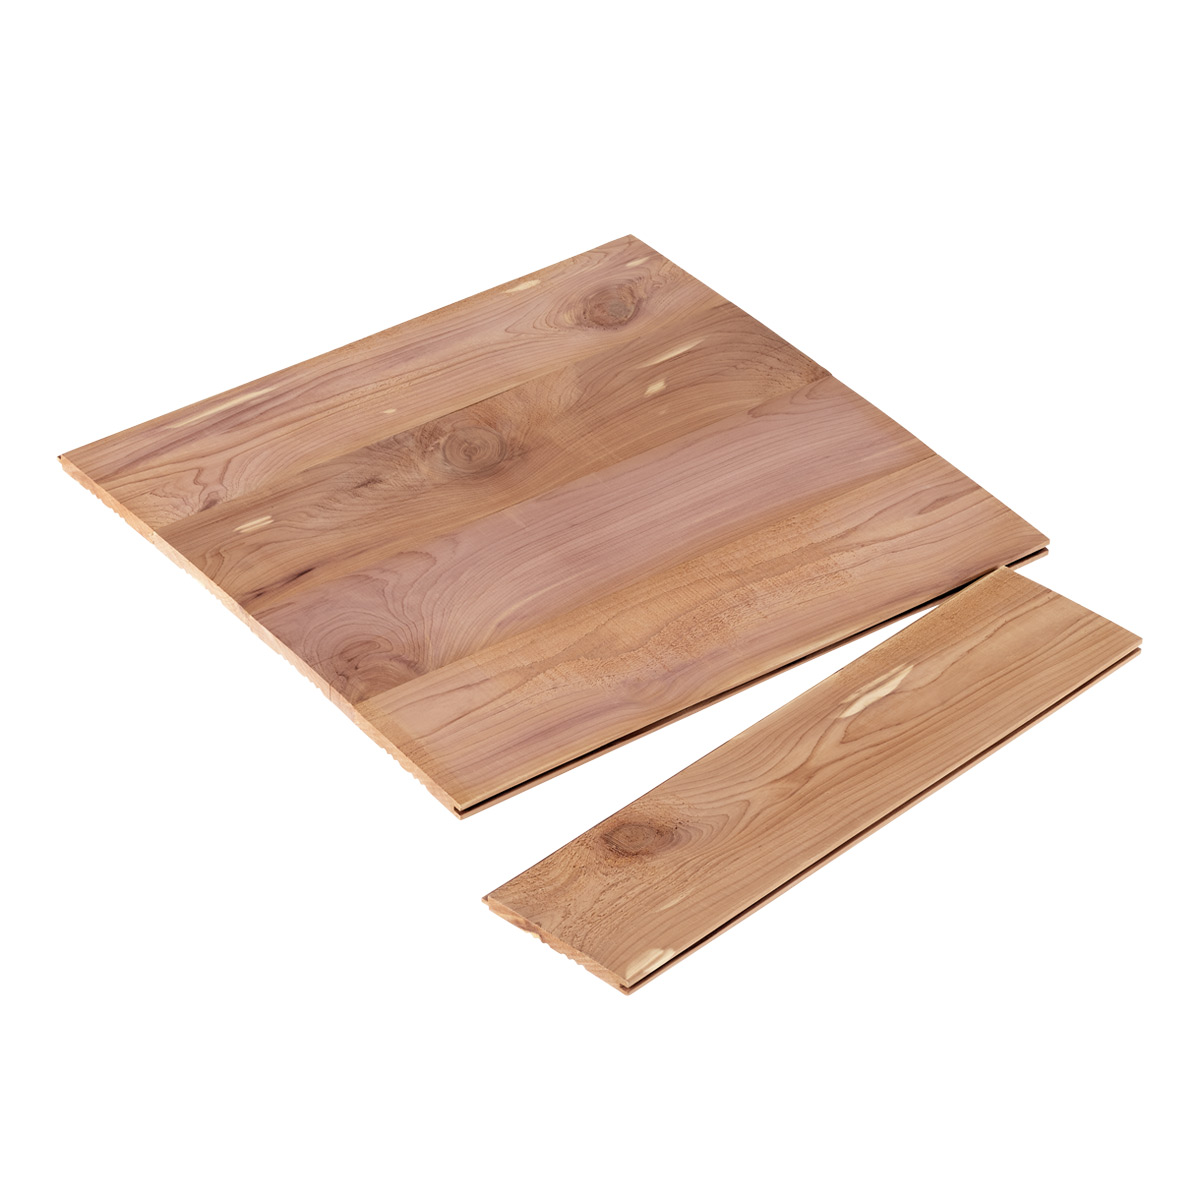 https://www.containerstore.com/catalogimages/425583/10074202_Cedar_Drawer_Liners.jpg